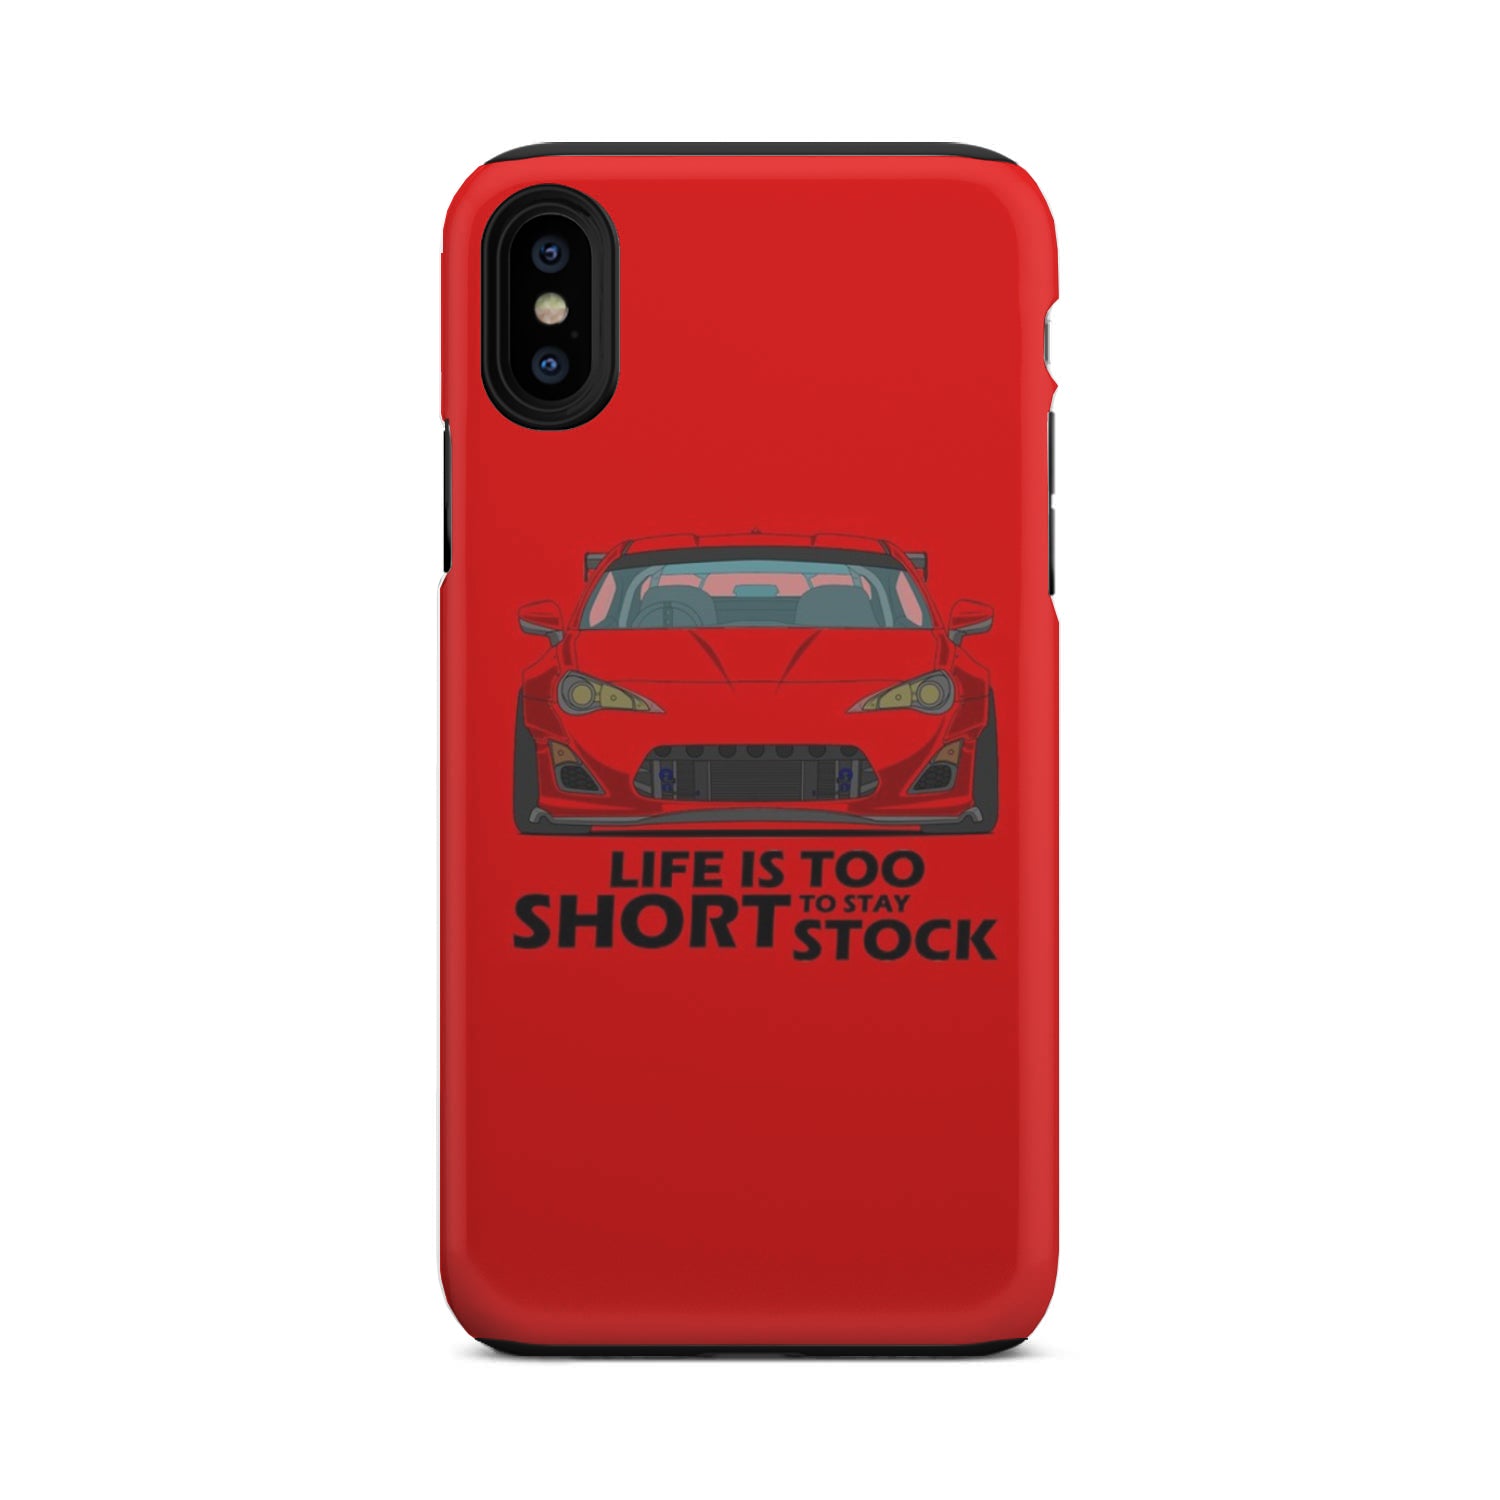 Life is too short to stay stock Phone Case